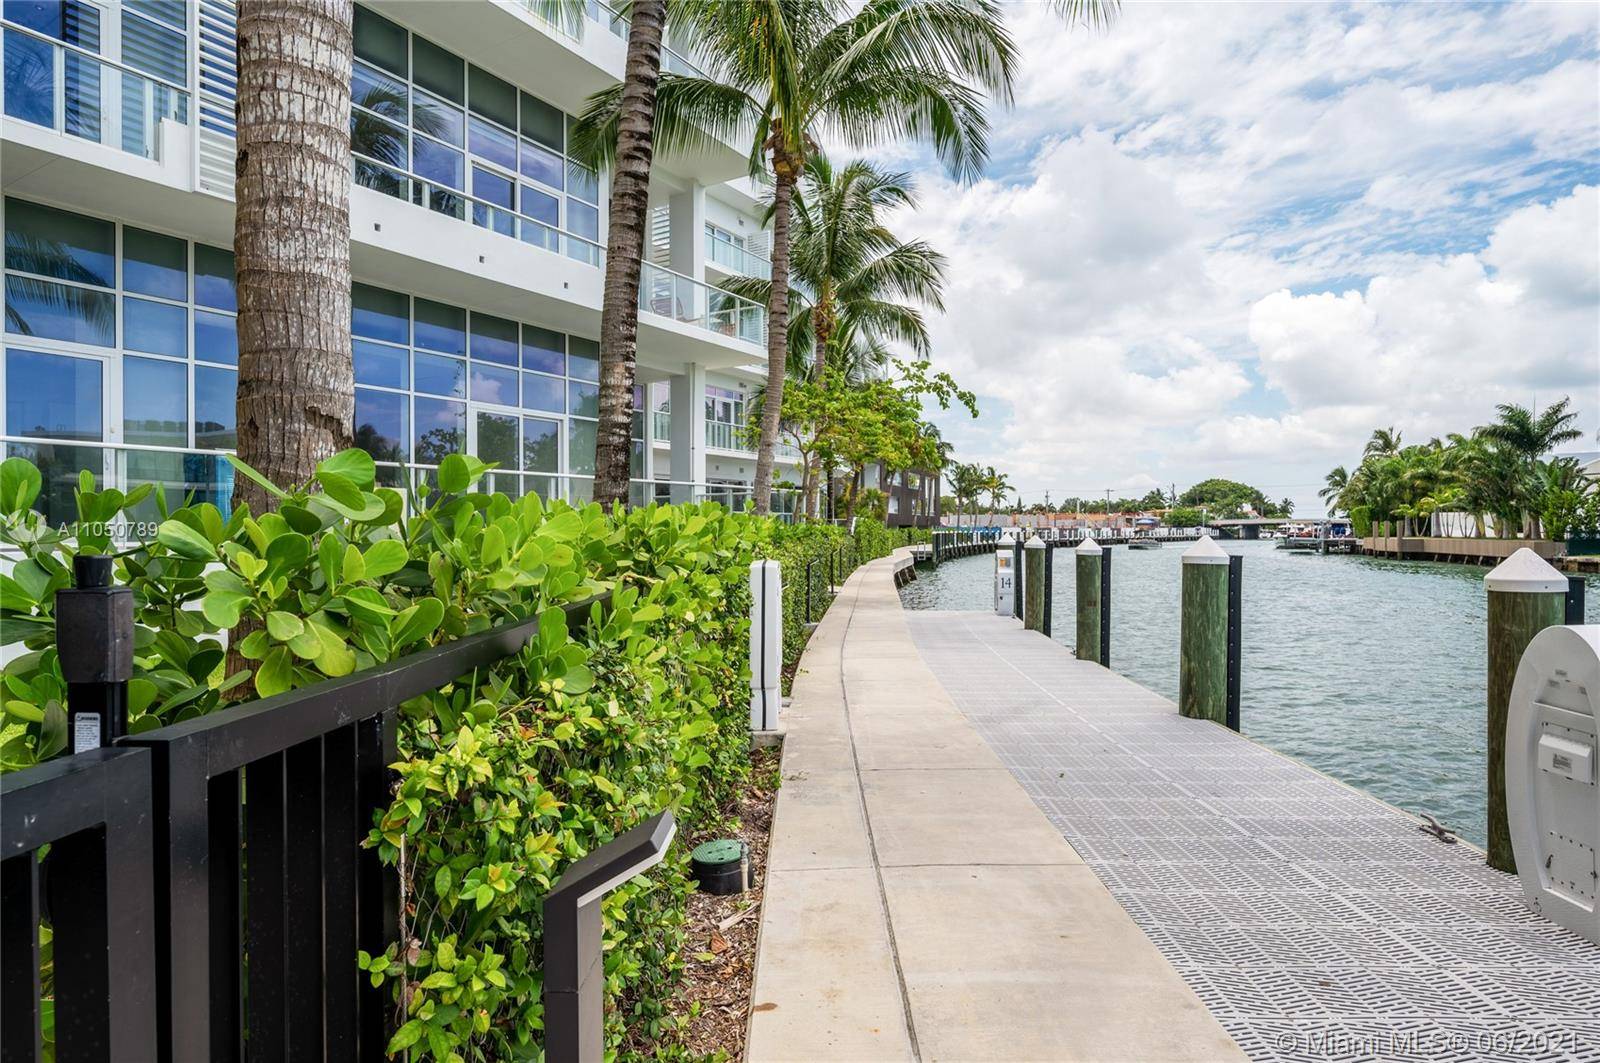 Waterfront Ground floor LakeHouse apartment with hi ceilings, beautiful Lake and intracoastal views.